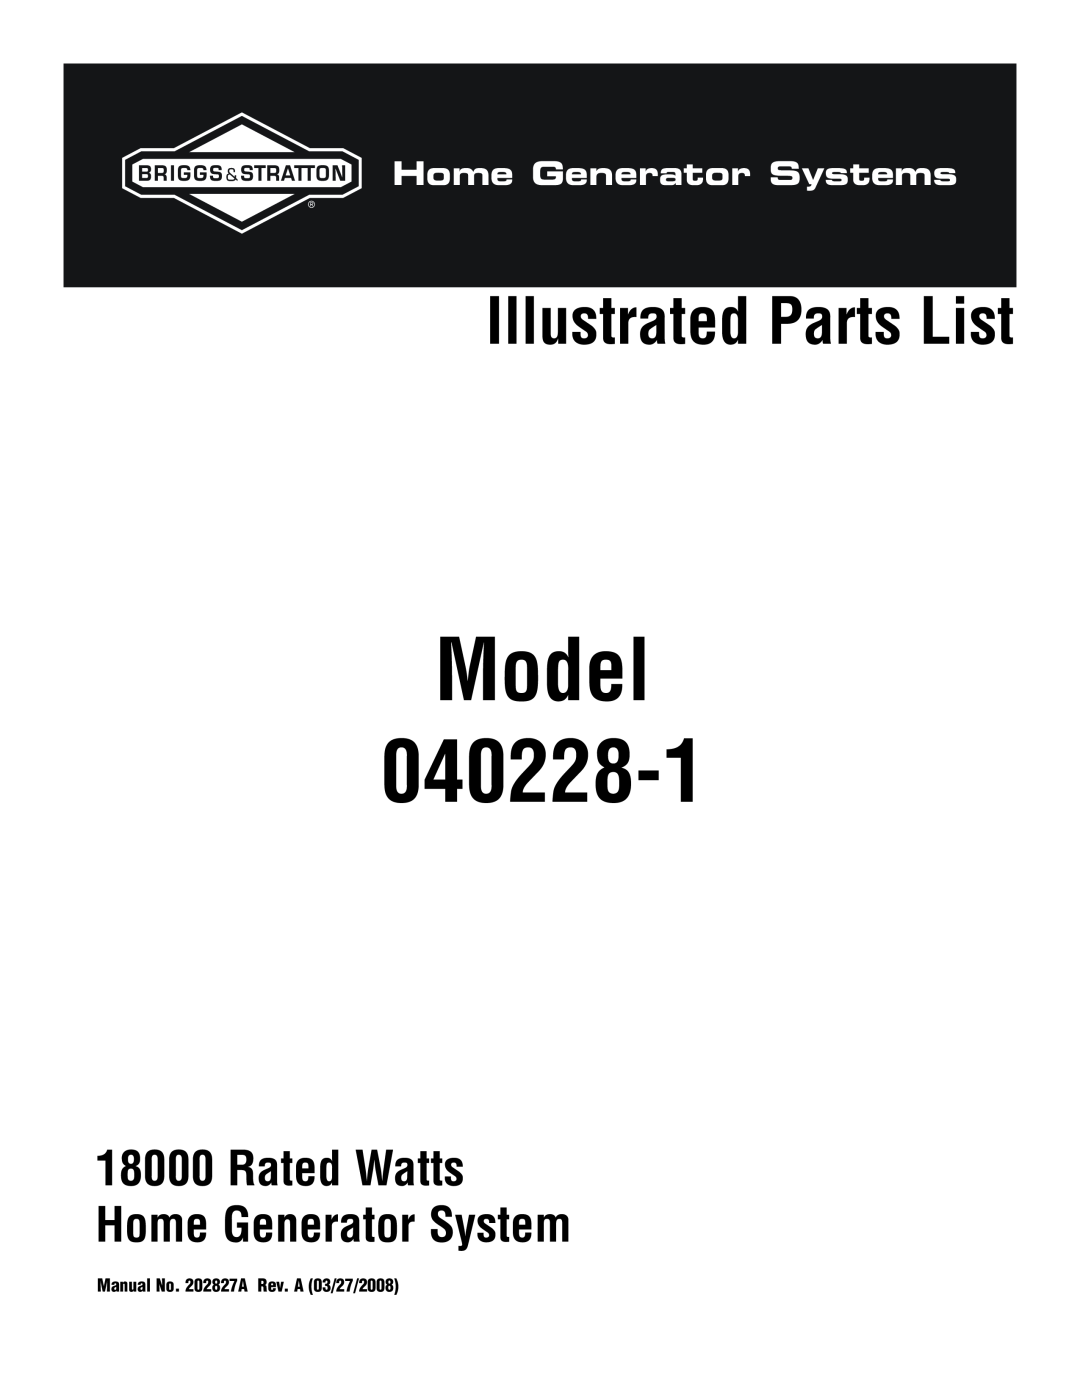 Briggs & Stratton 040228-1 manual Model, Illustrated Parts List, Rated Watts Home Generator System, Home Generator Systems 